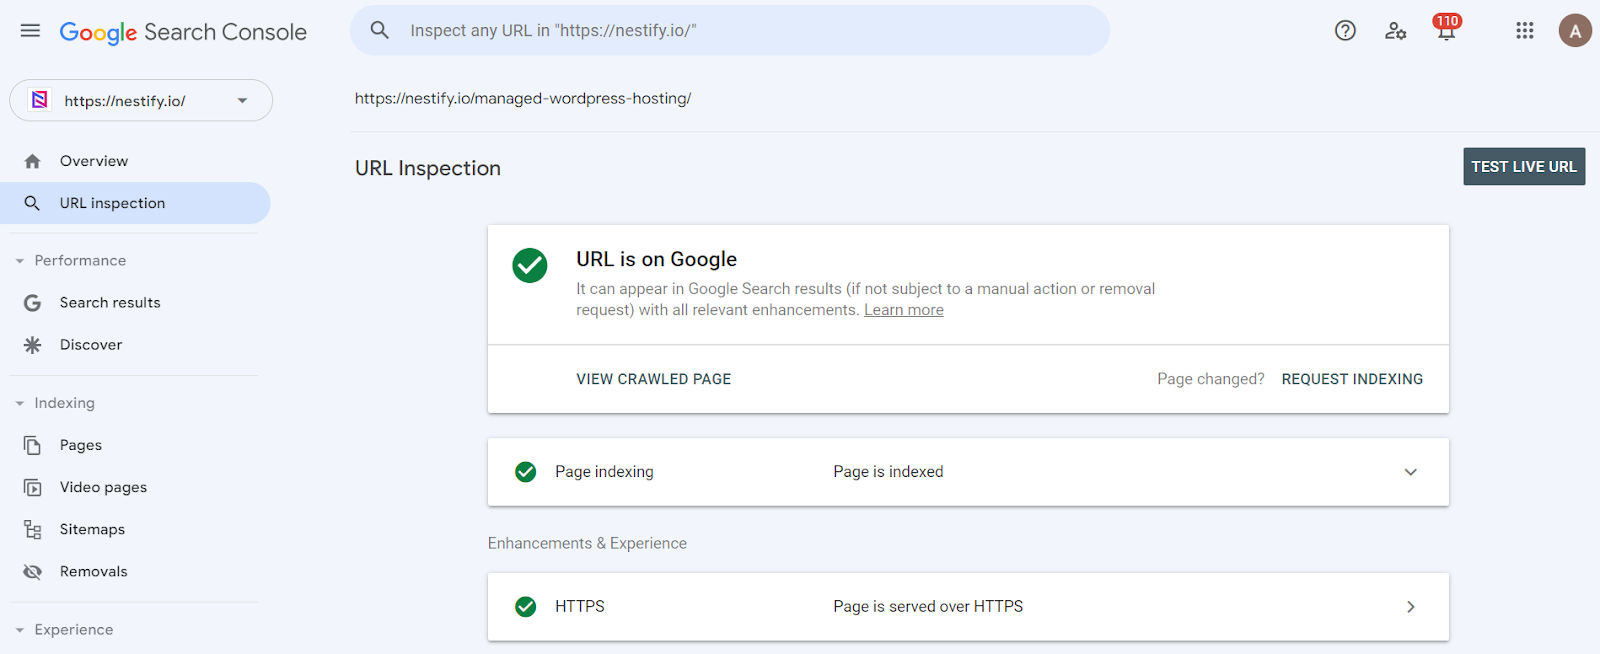 Search Console's URL Inspection tool 